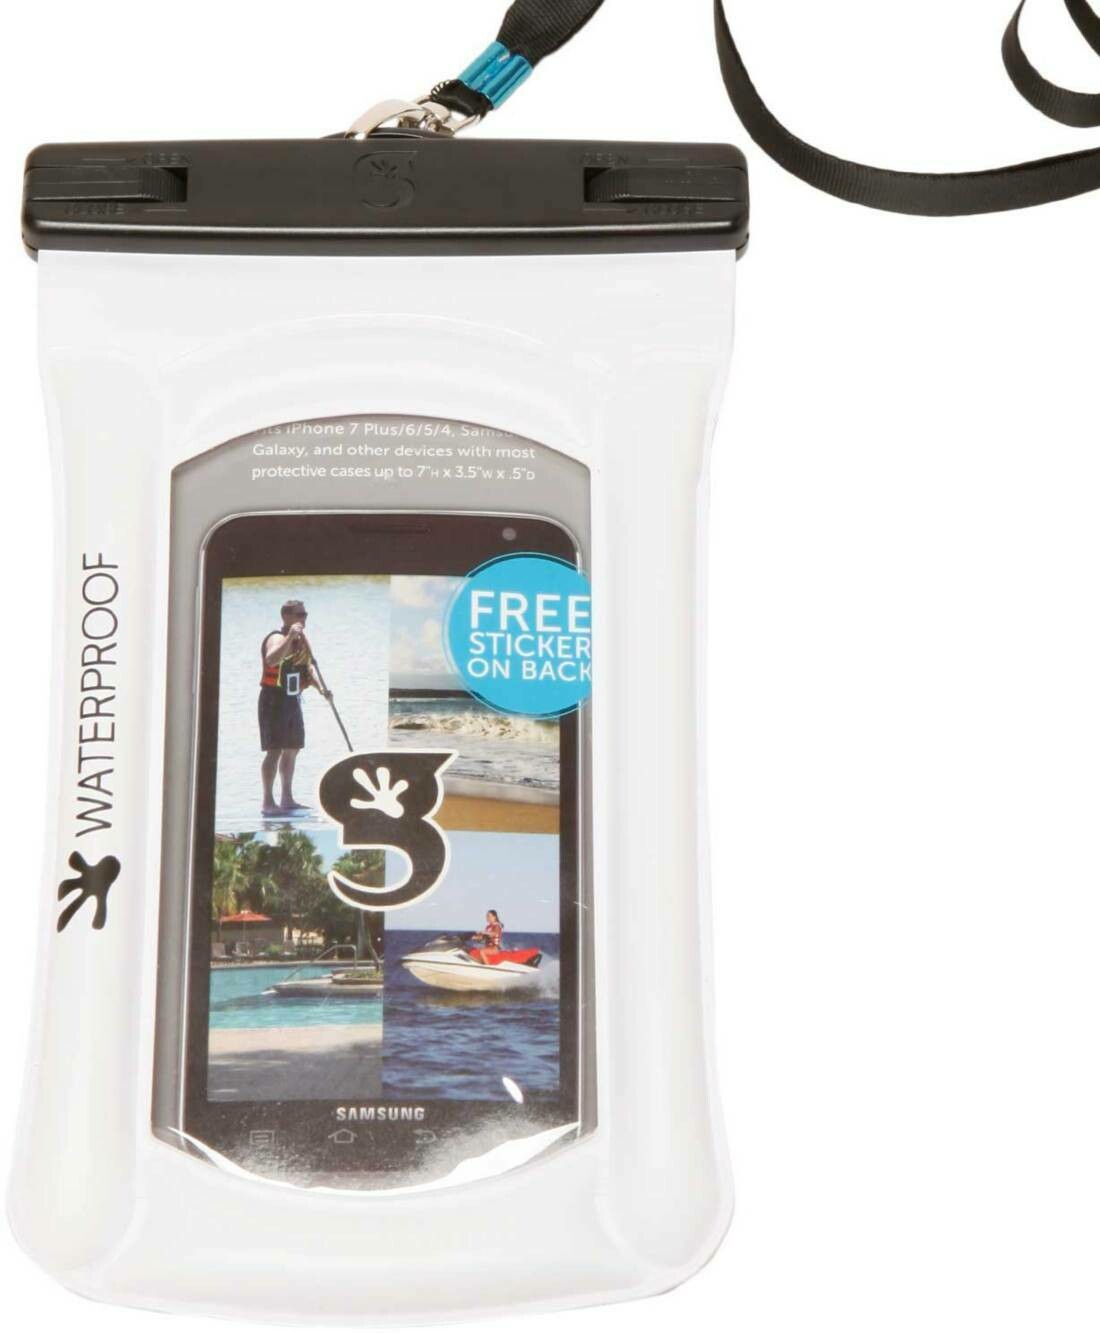 geckobrands Float Phone Dry Bag With Optional Arm Band - White